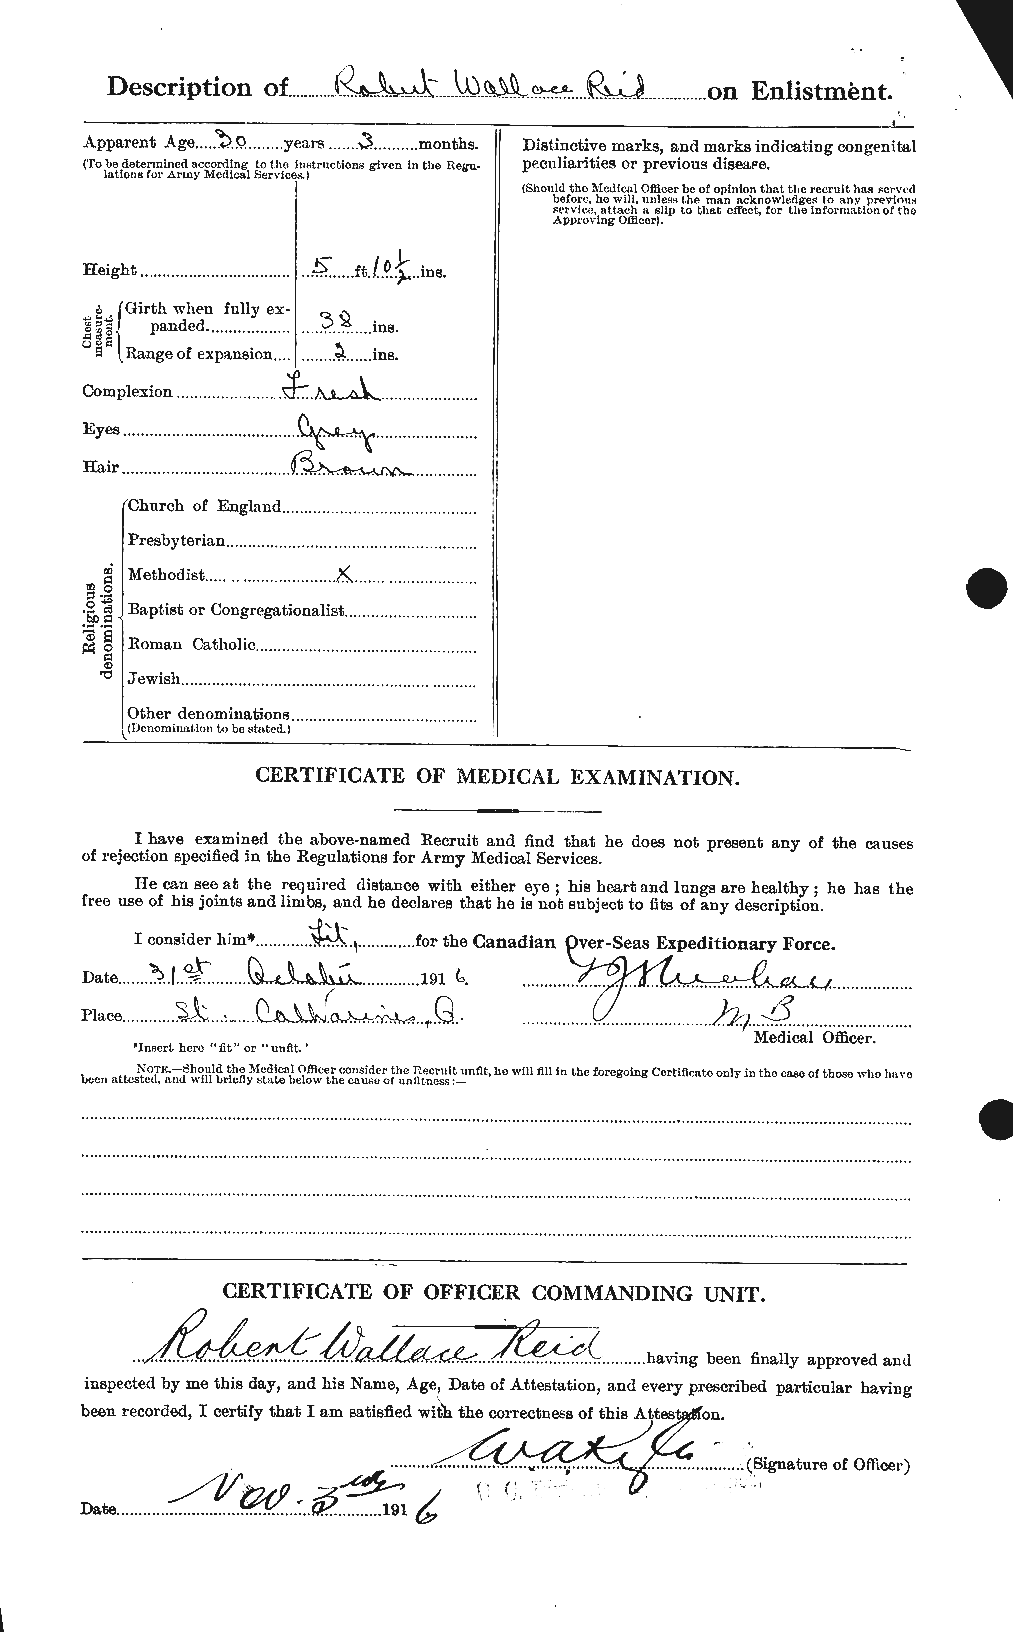 Personnel Records of the First World War - CEF 601925b